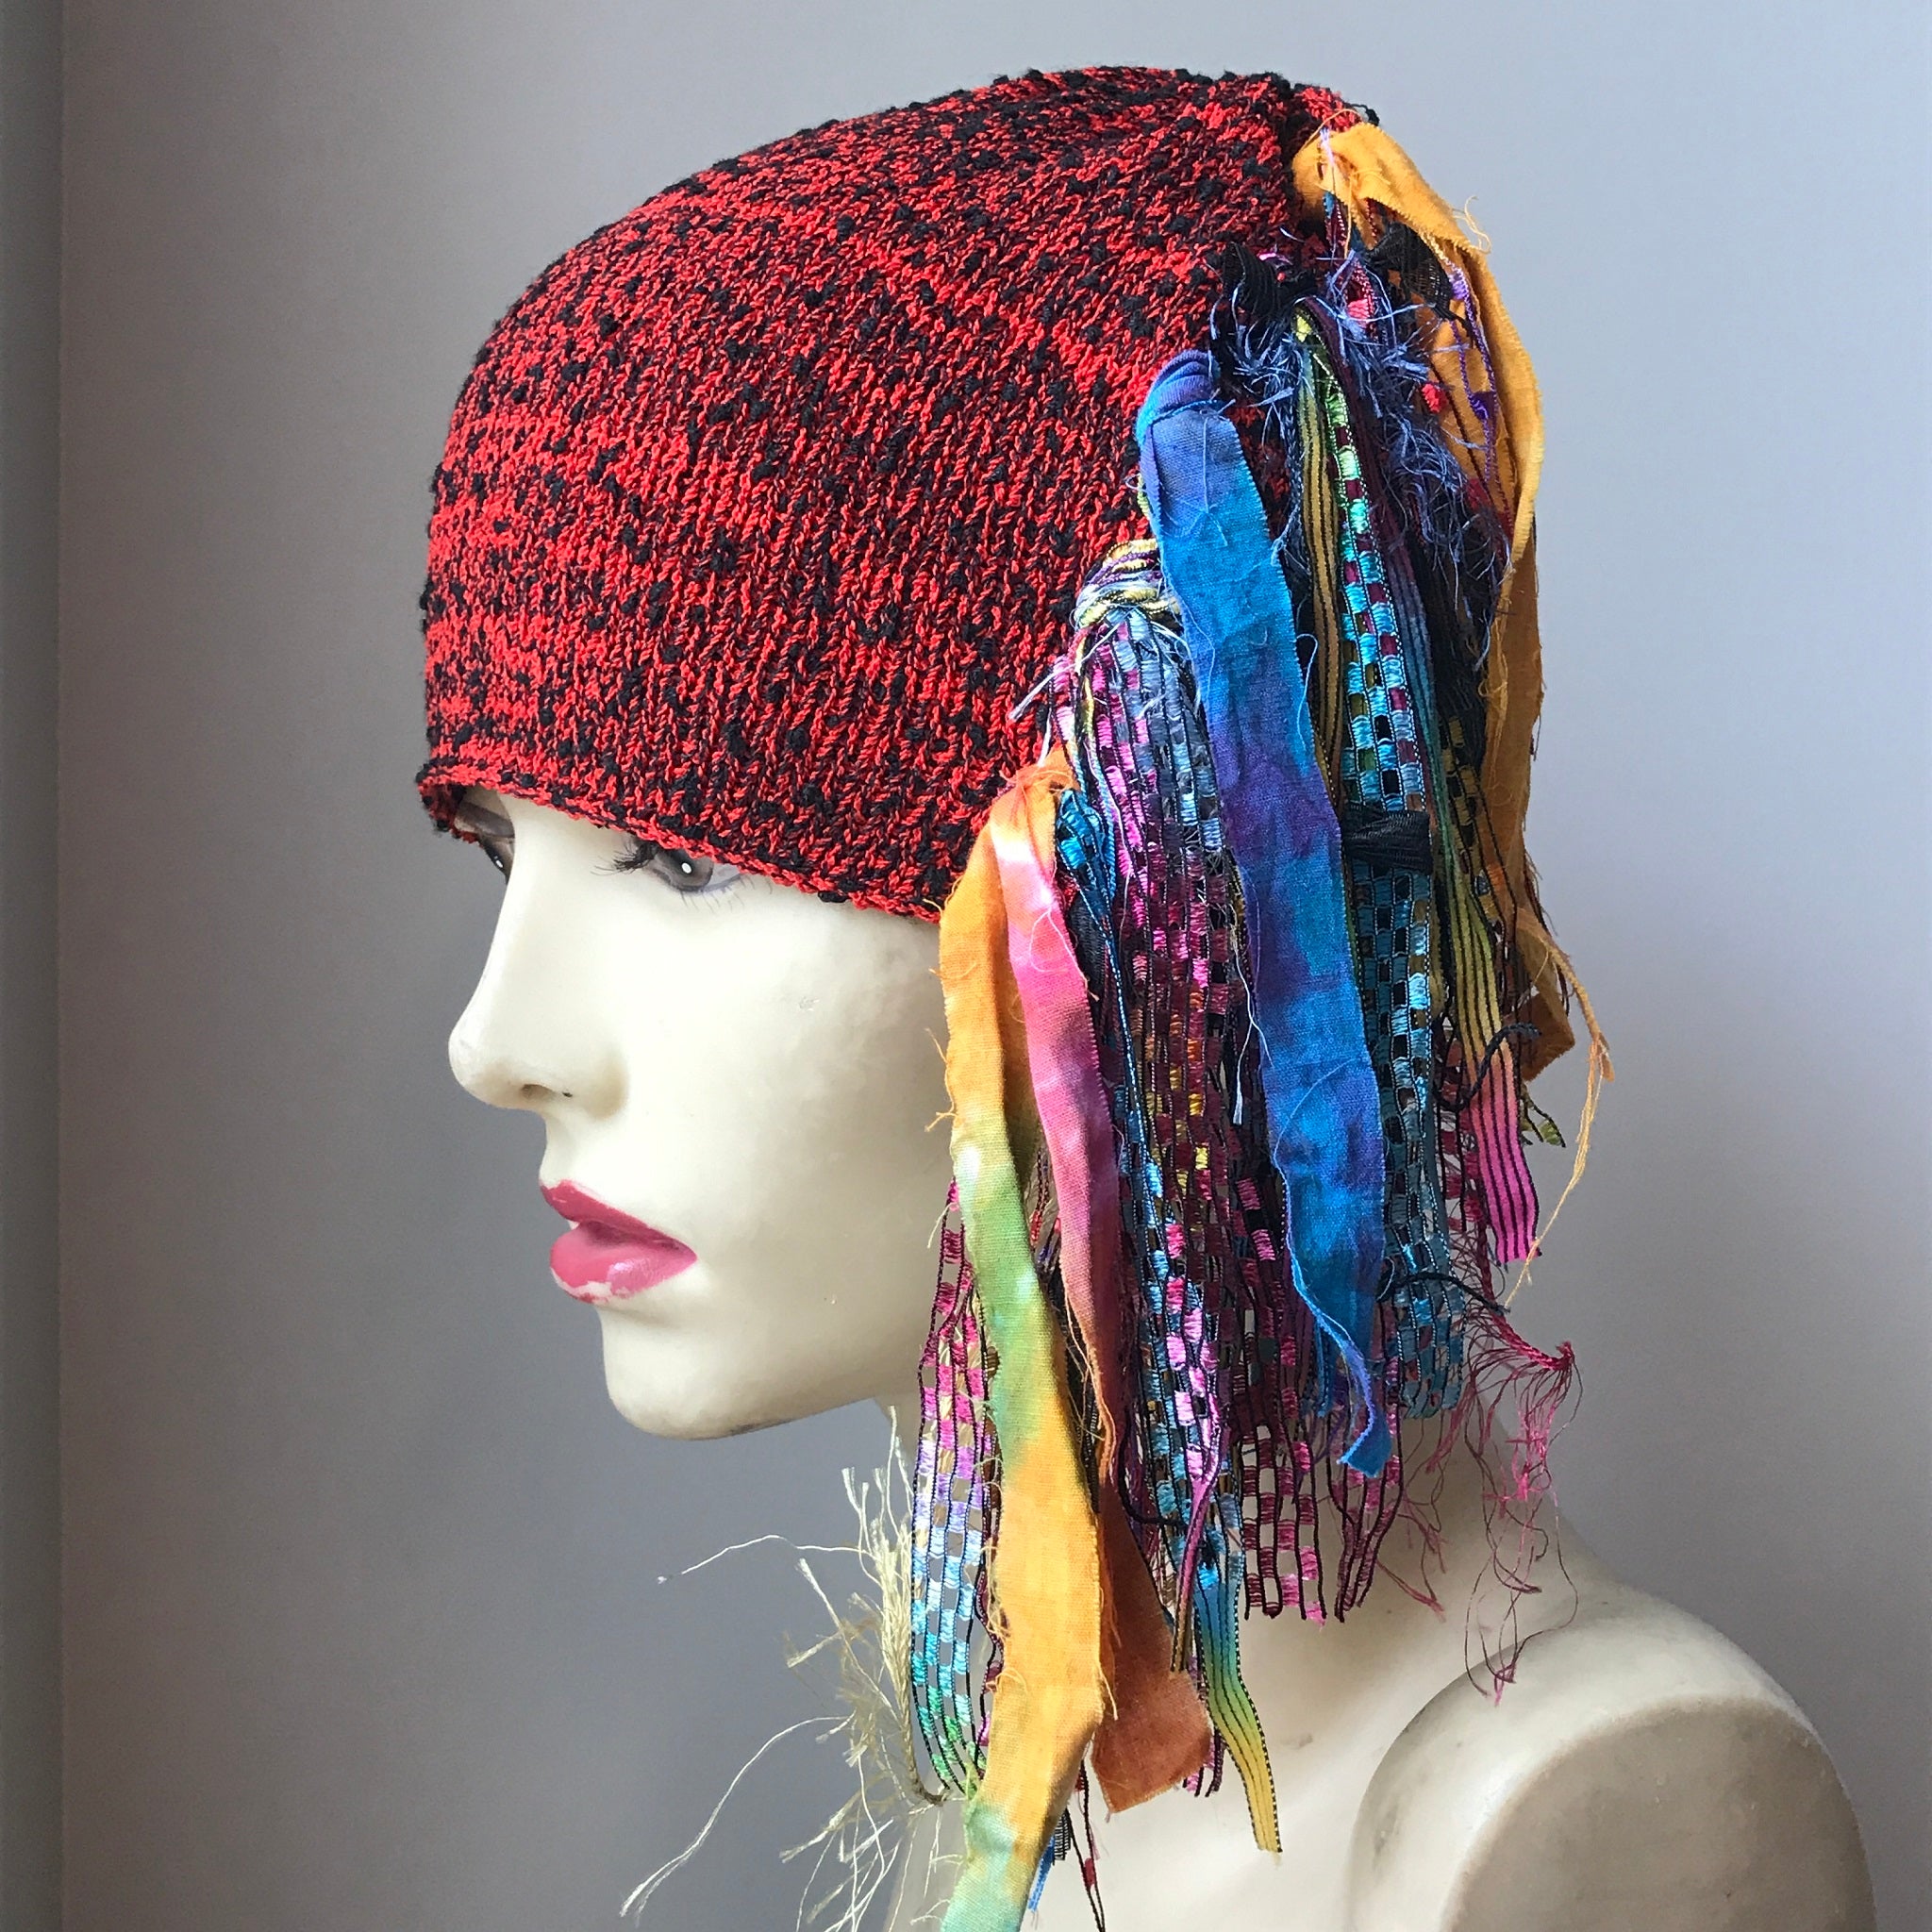 Red Tweed Funky Chic Hat, (FH17)